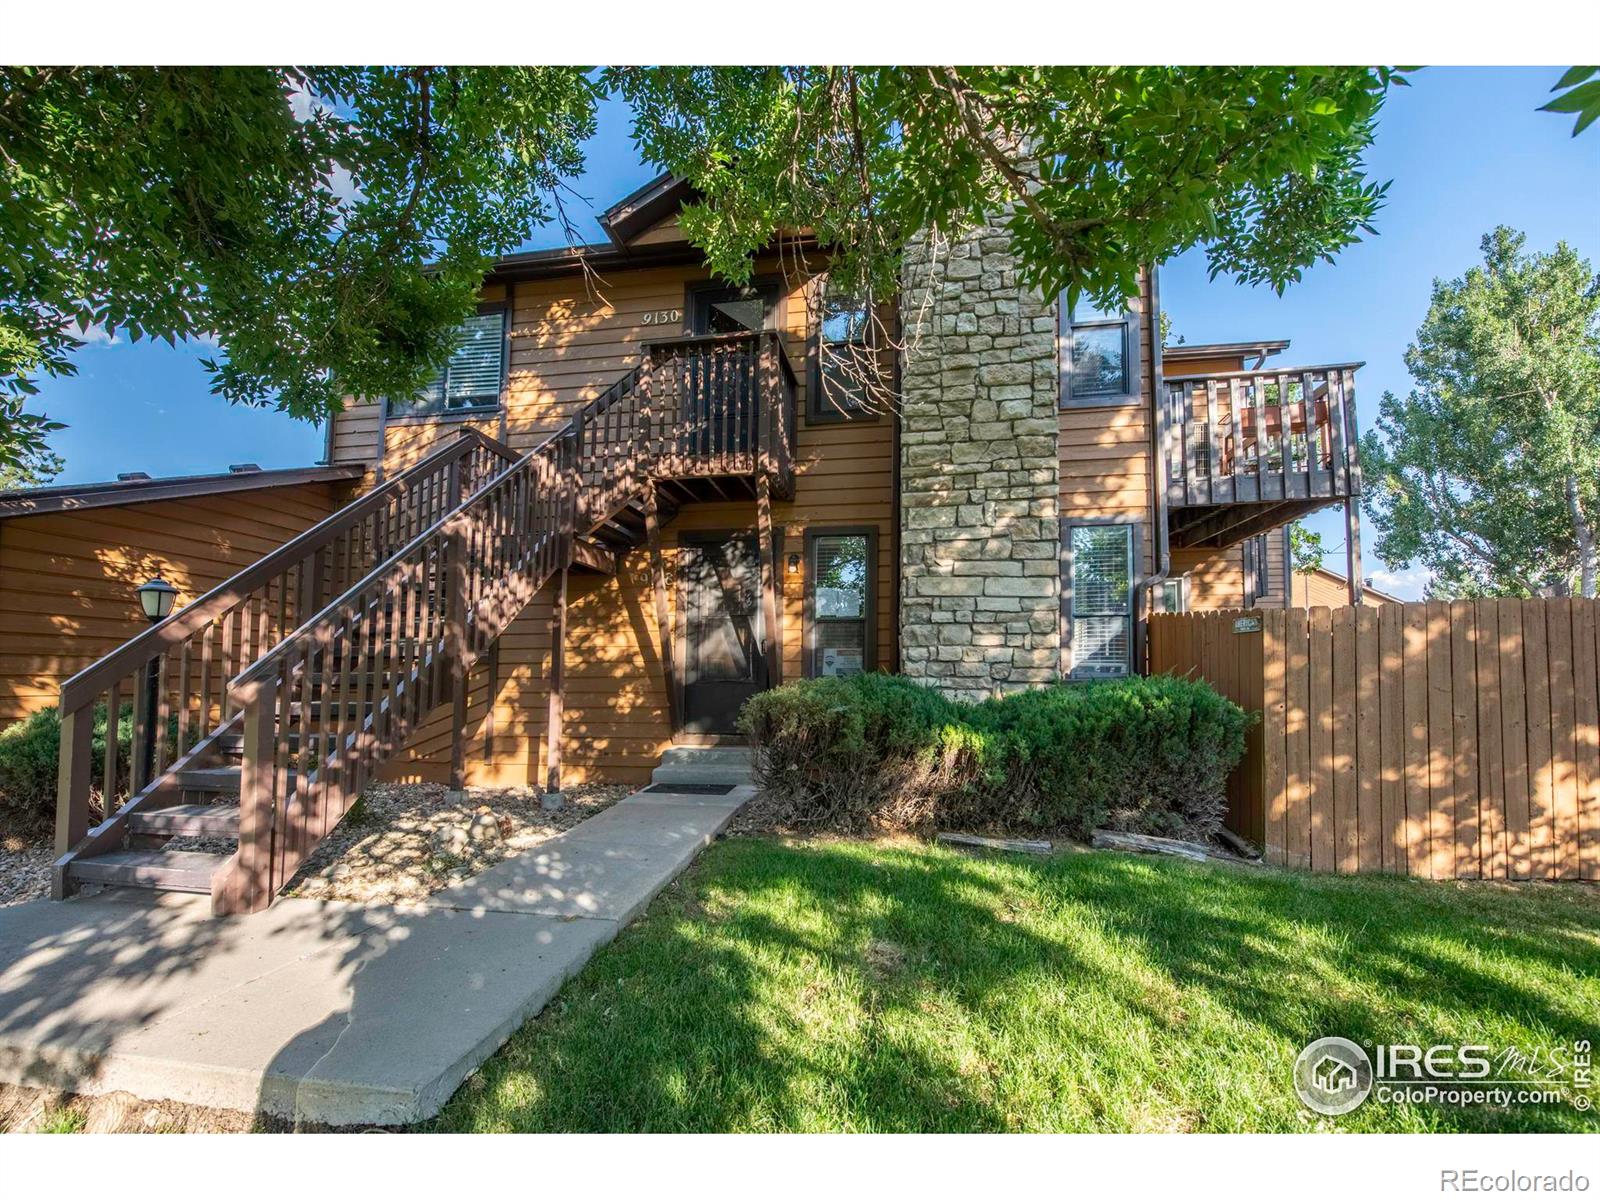 9128 88th, Westminster, CO